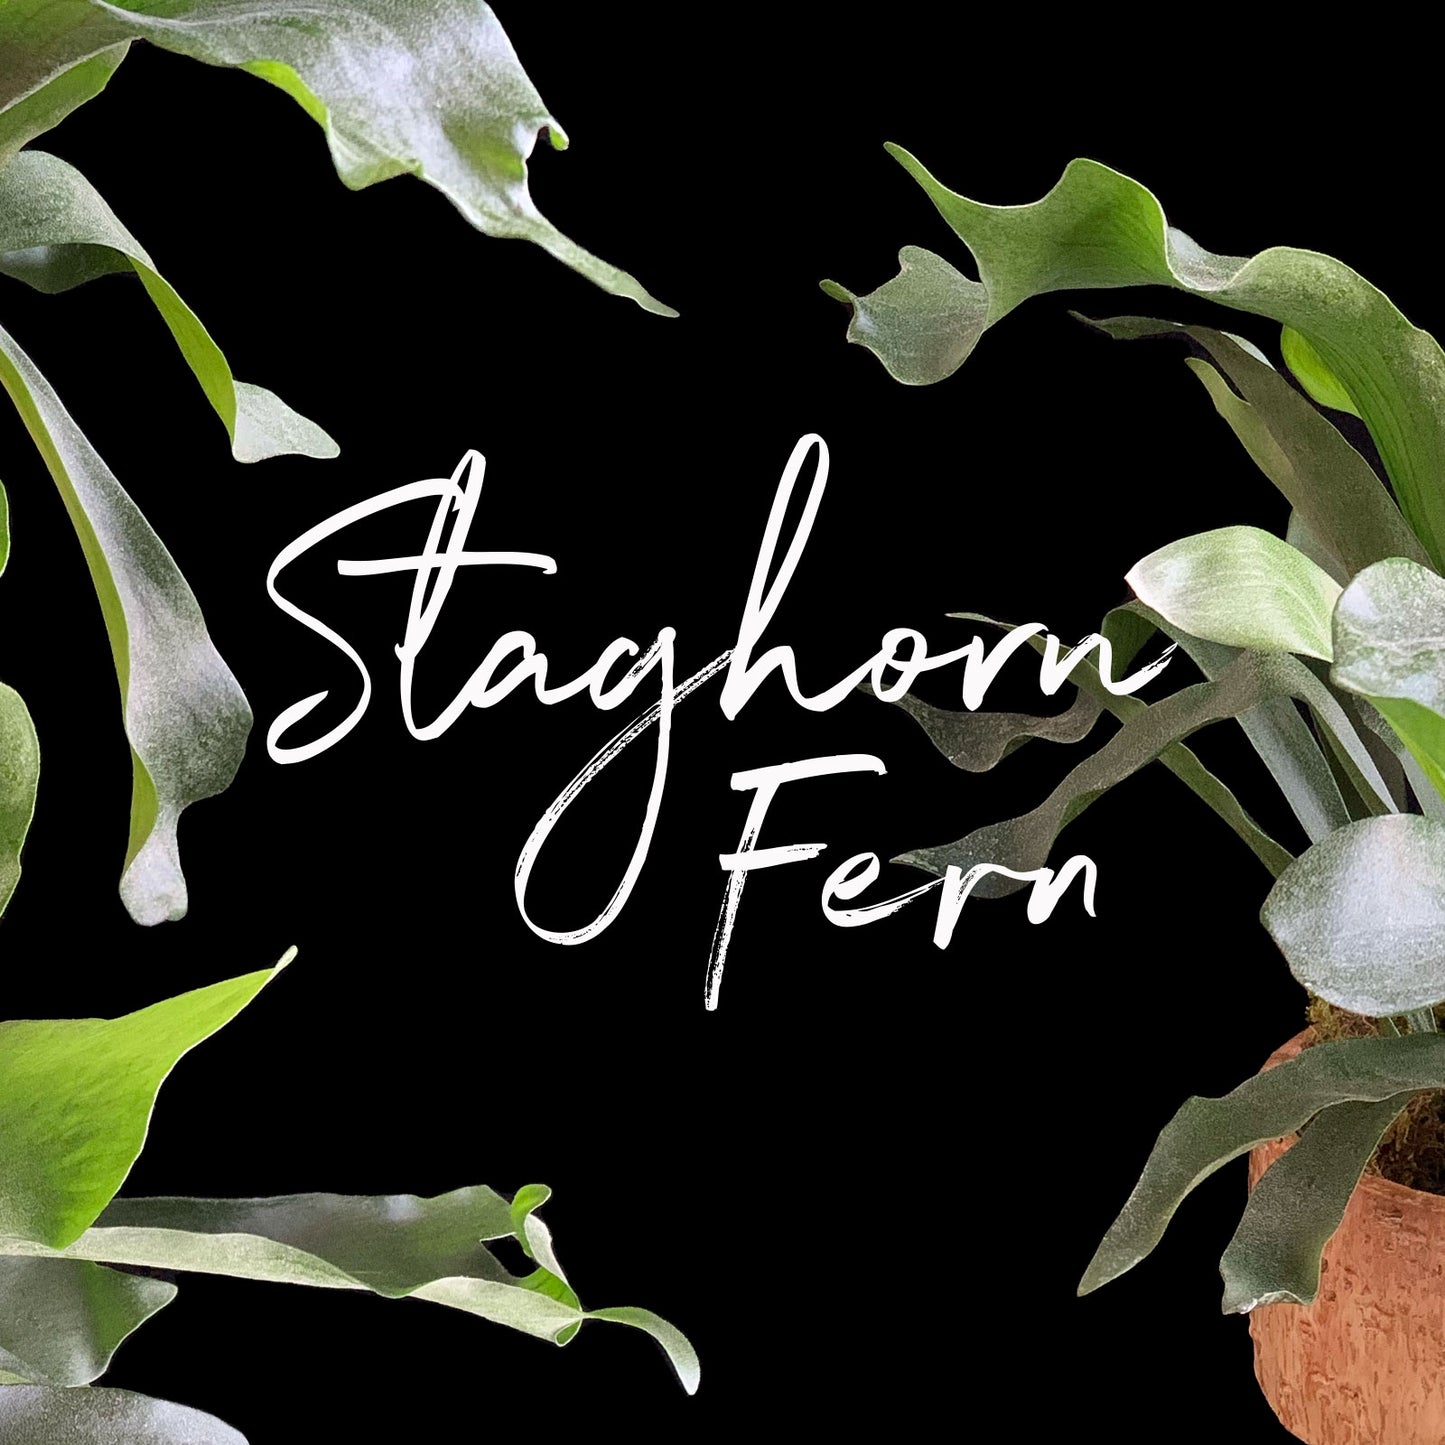 An image featuring the text ‘Staghorn Fern’ in elegant white script, surrounded by green staghorn fern leaves against a black background. Order online for same-day flower delivery from the best florist in Toronto near you.